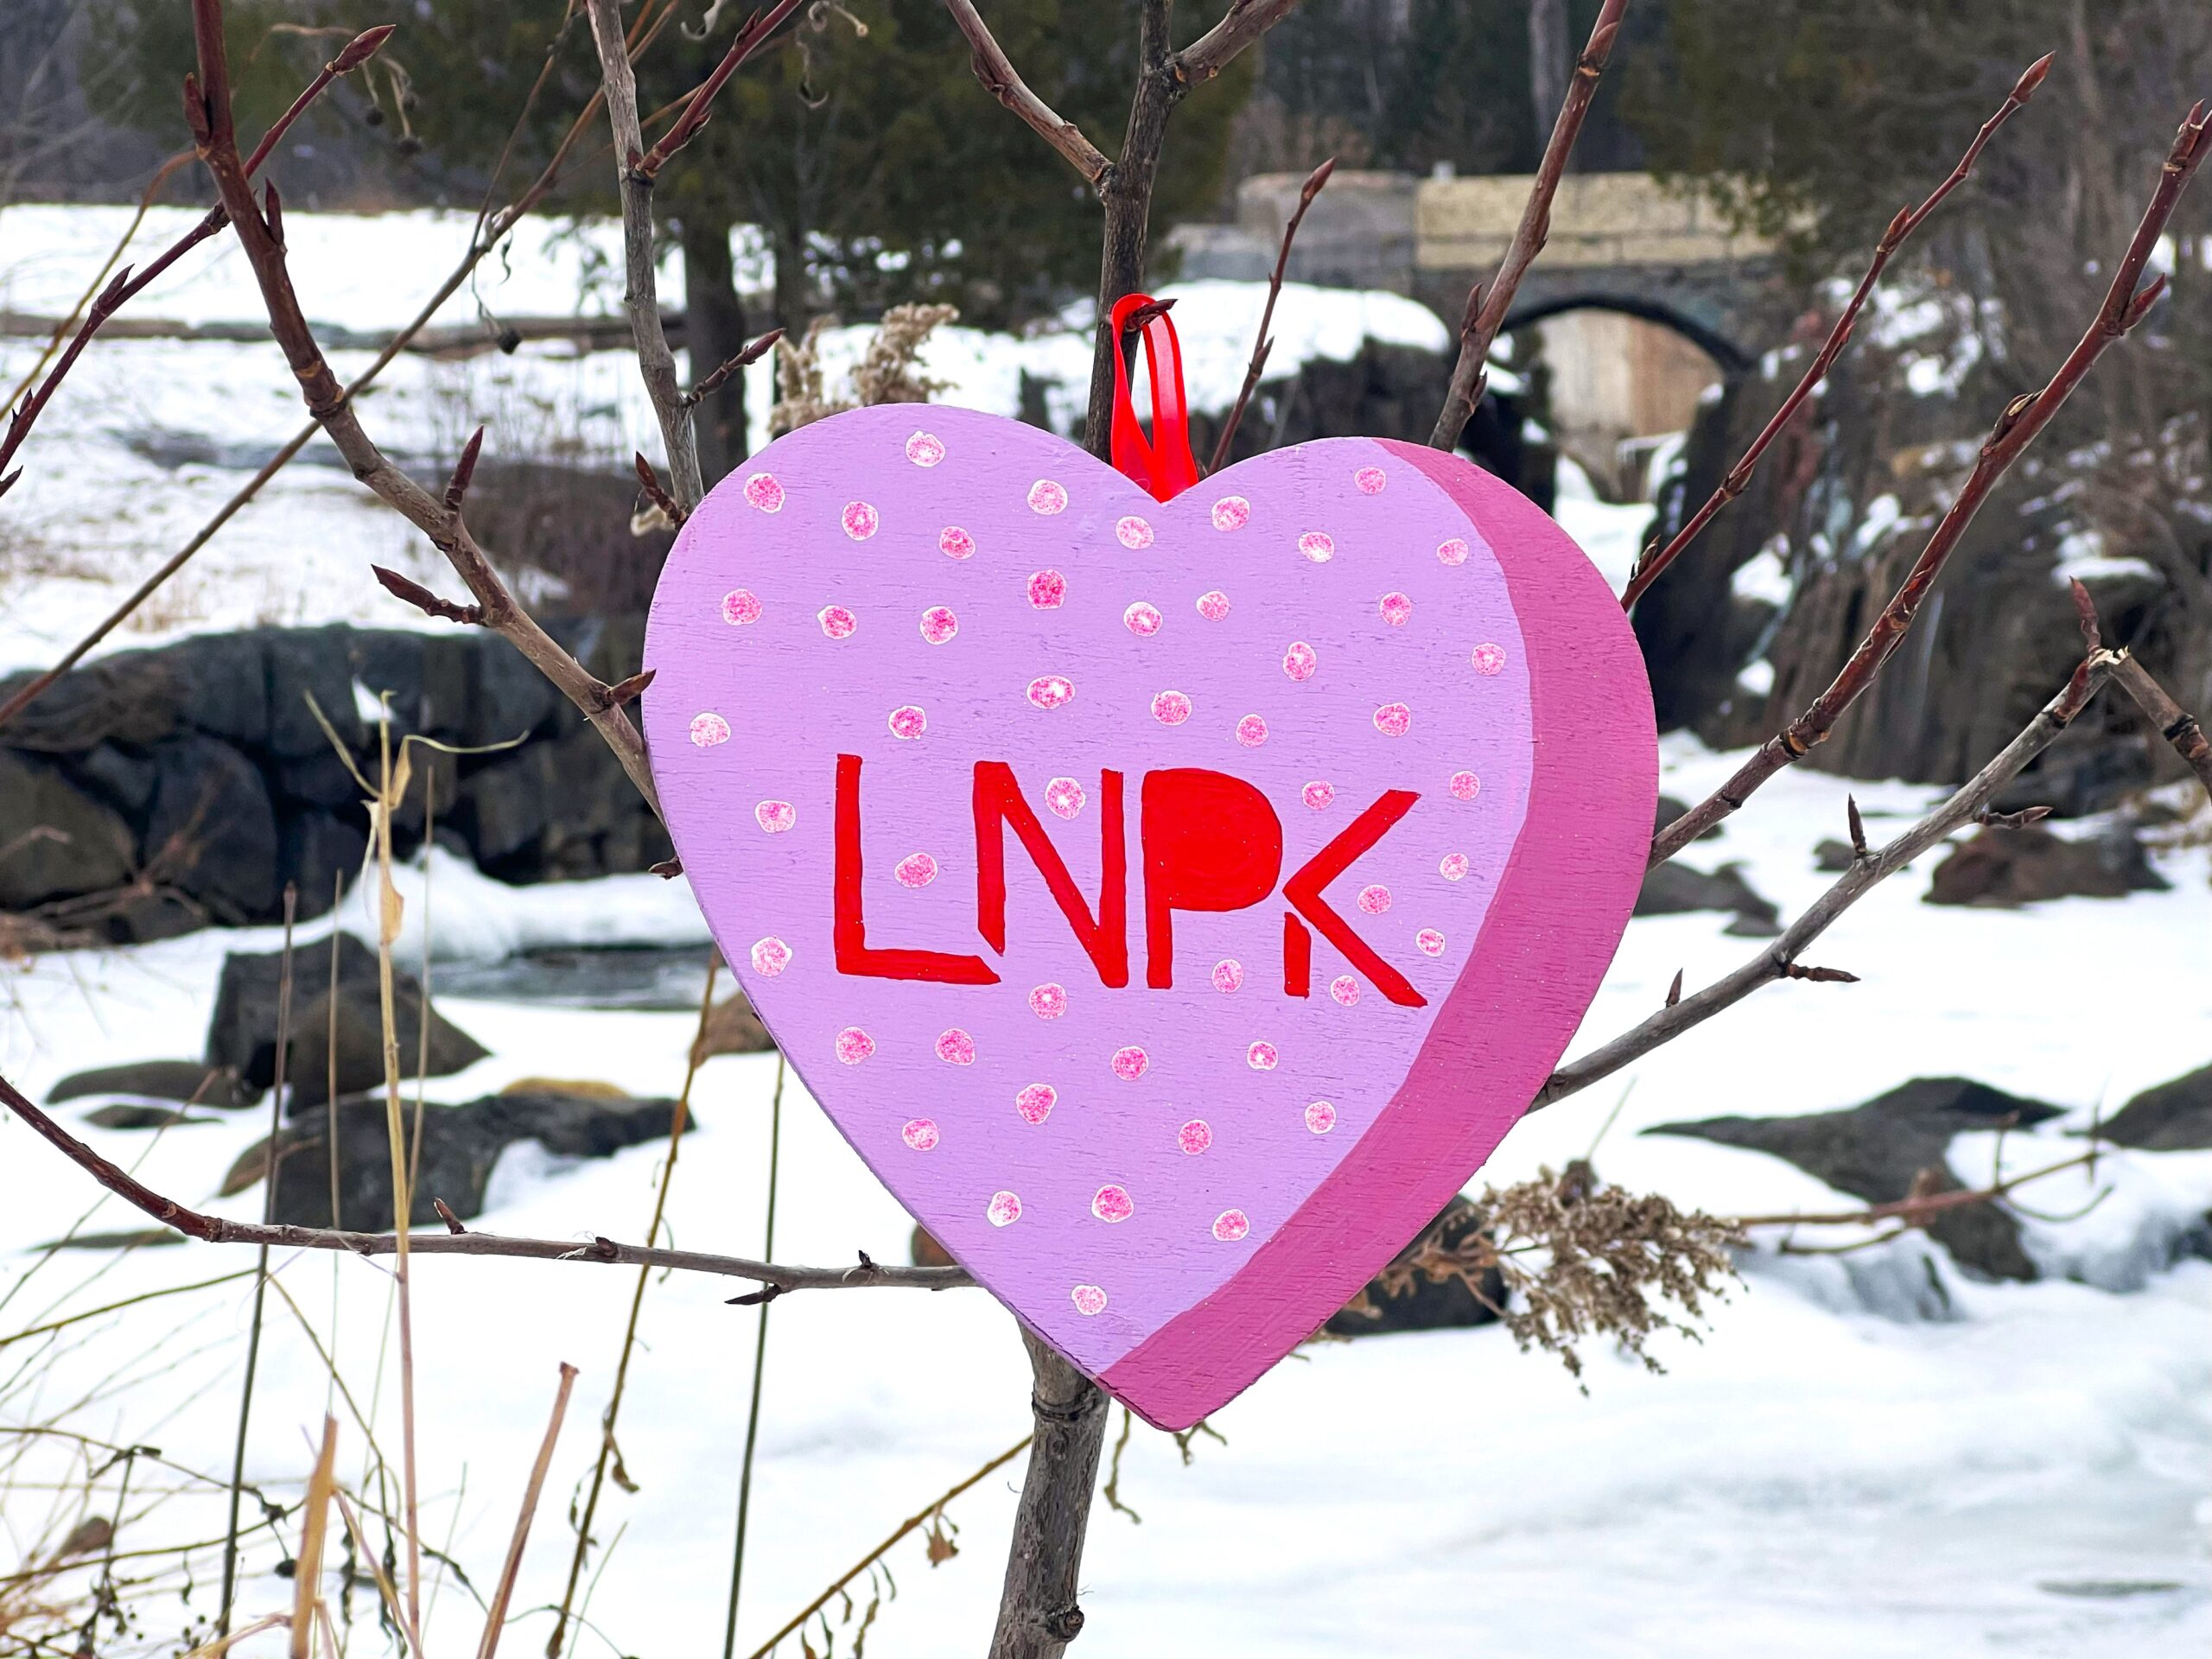 Bright pink heart with sparkling polka dots and "LNPK" in red hangs on a tree in front of a frozen creek.